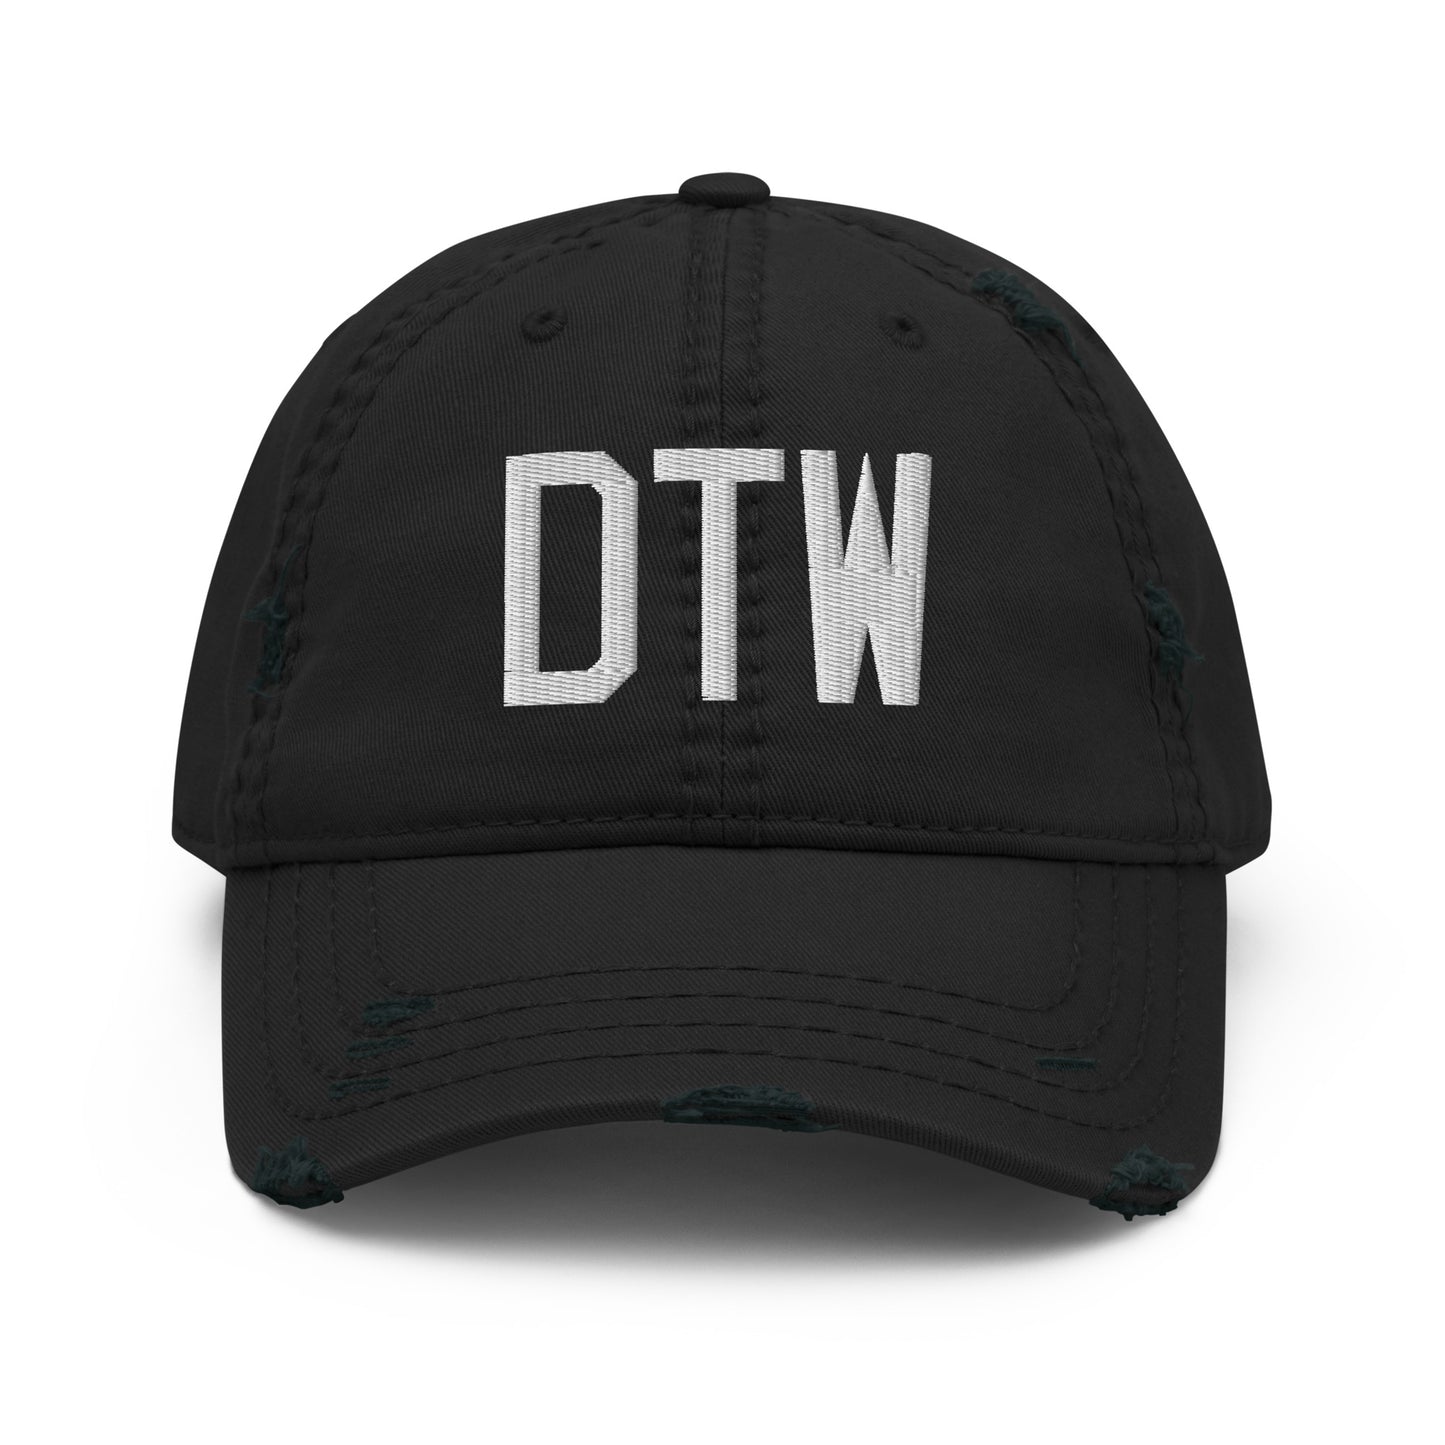 Airport Code Distressed Hat - White • DTW Detroit • YHM Designs - Image 10